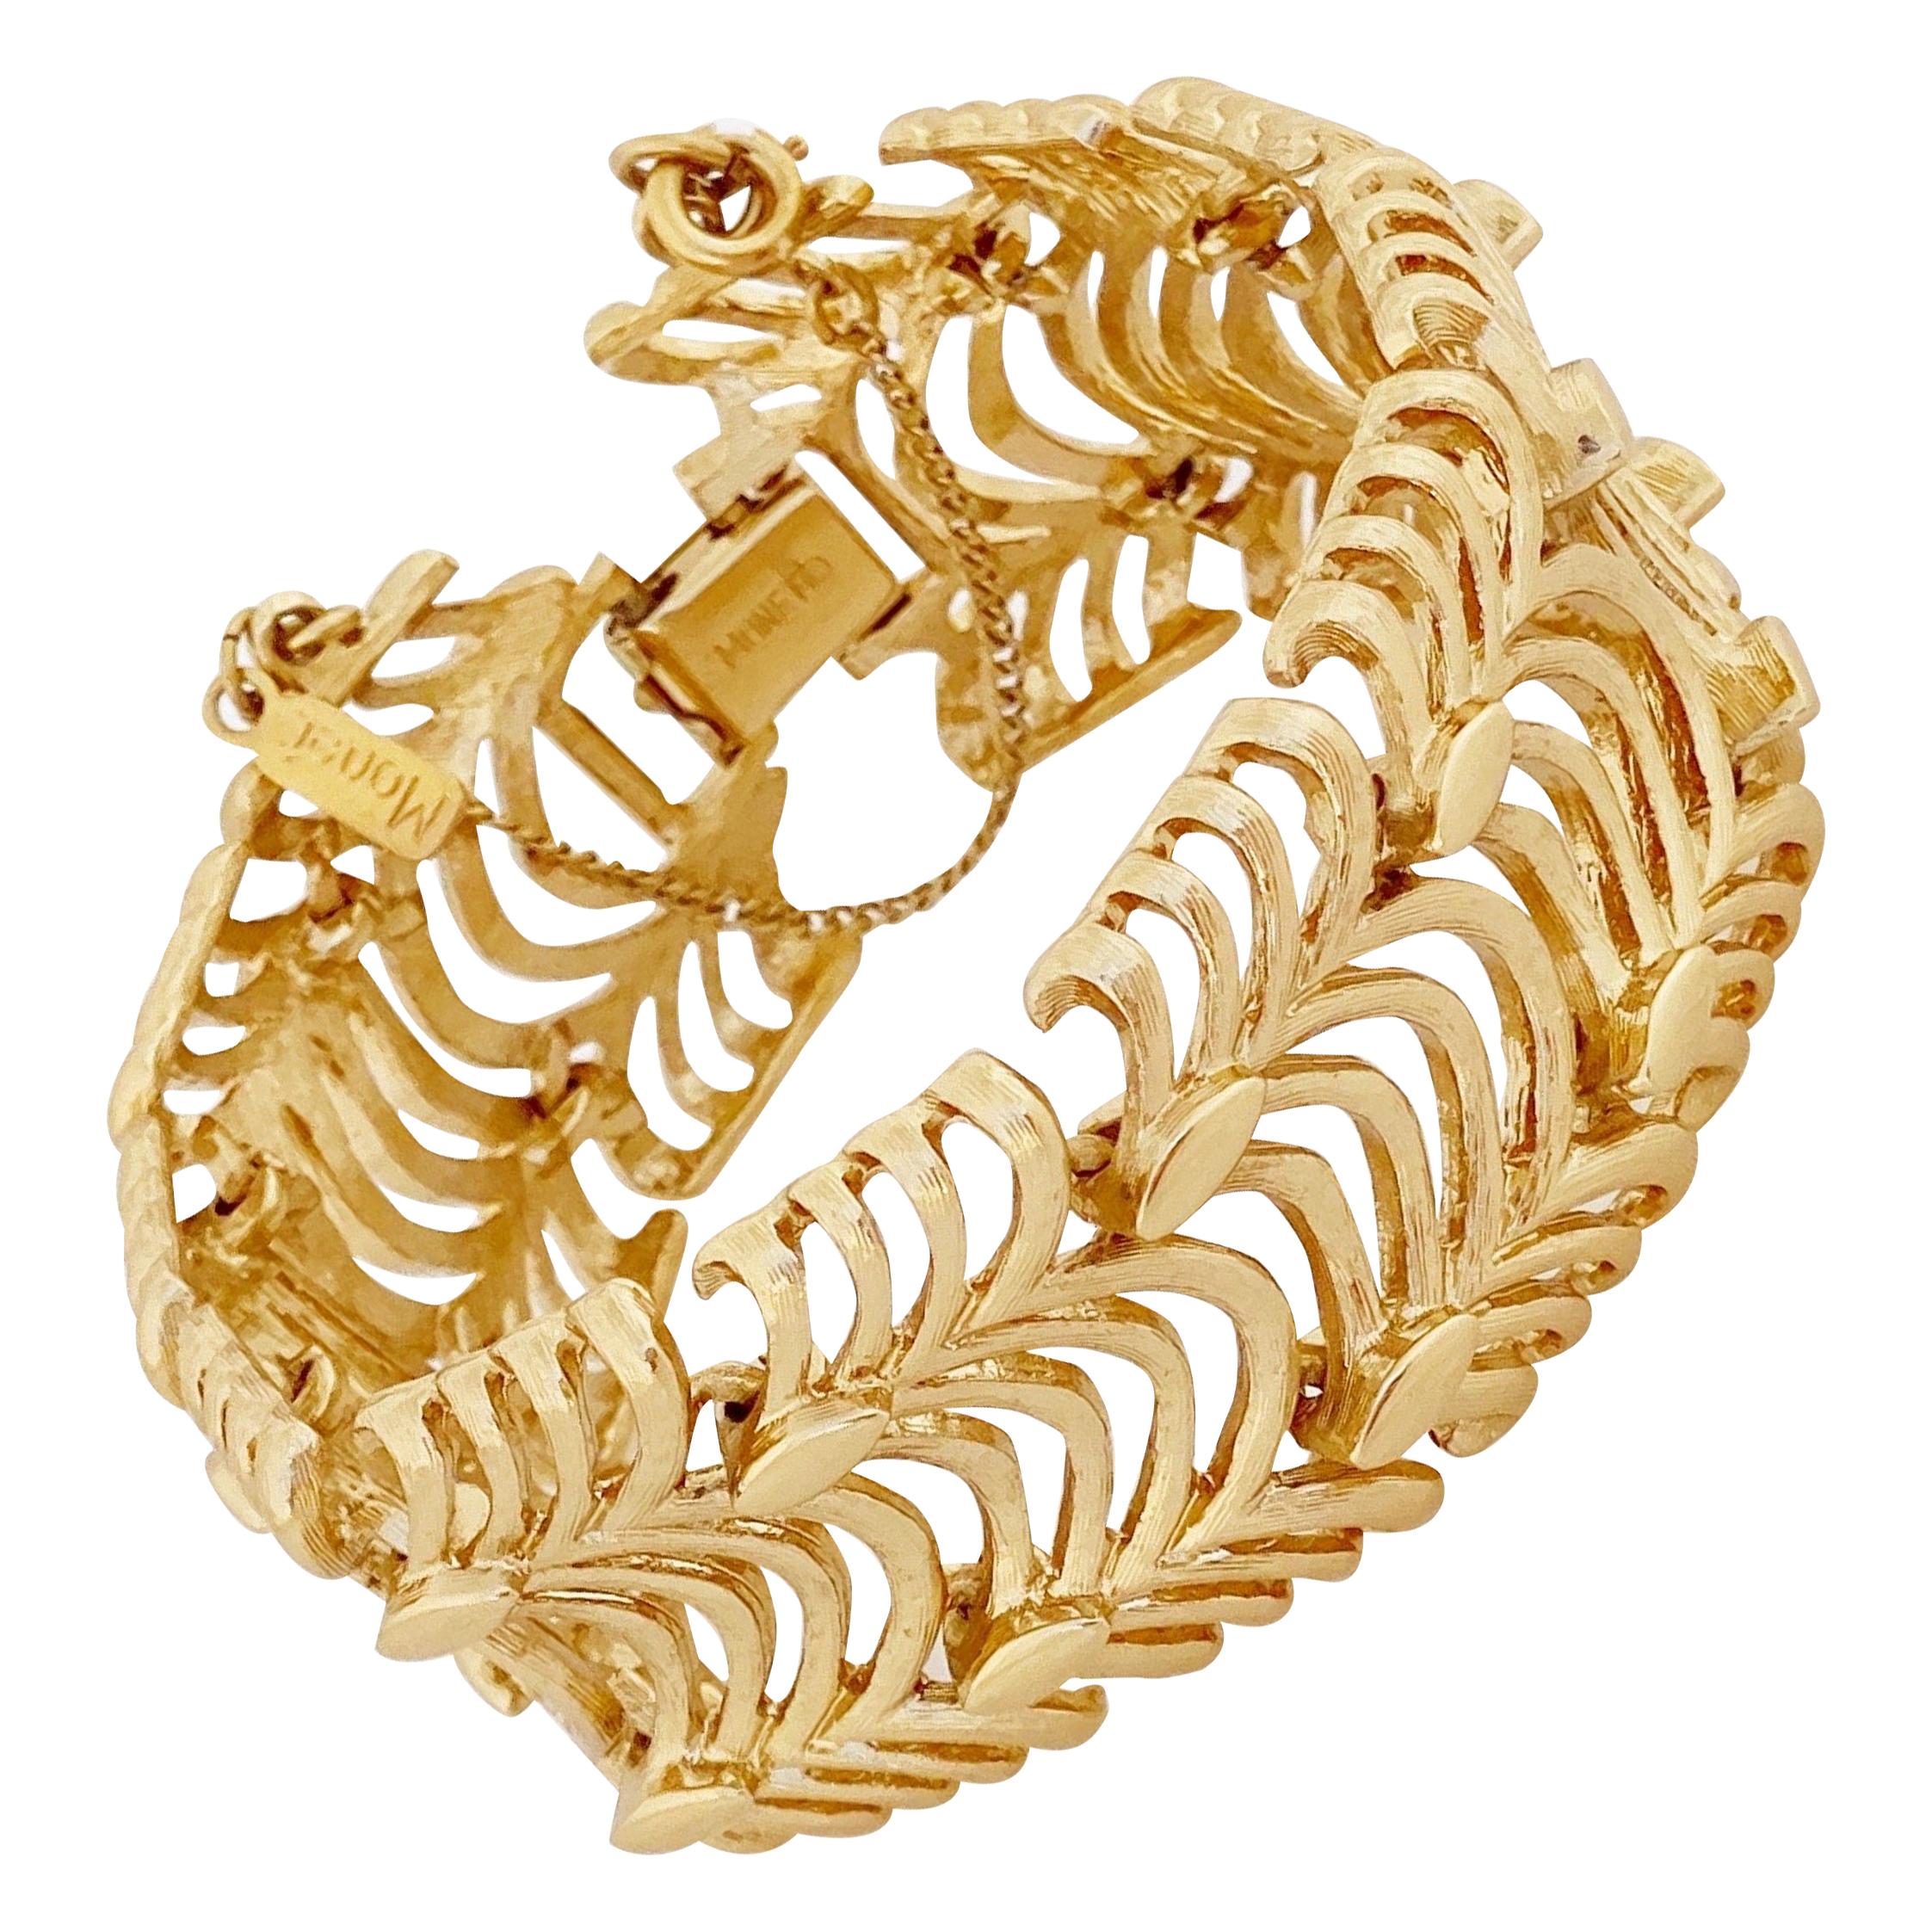 Gilded Textured Wavy Link Bracelet By Monet, 1960s